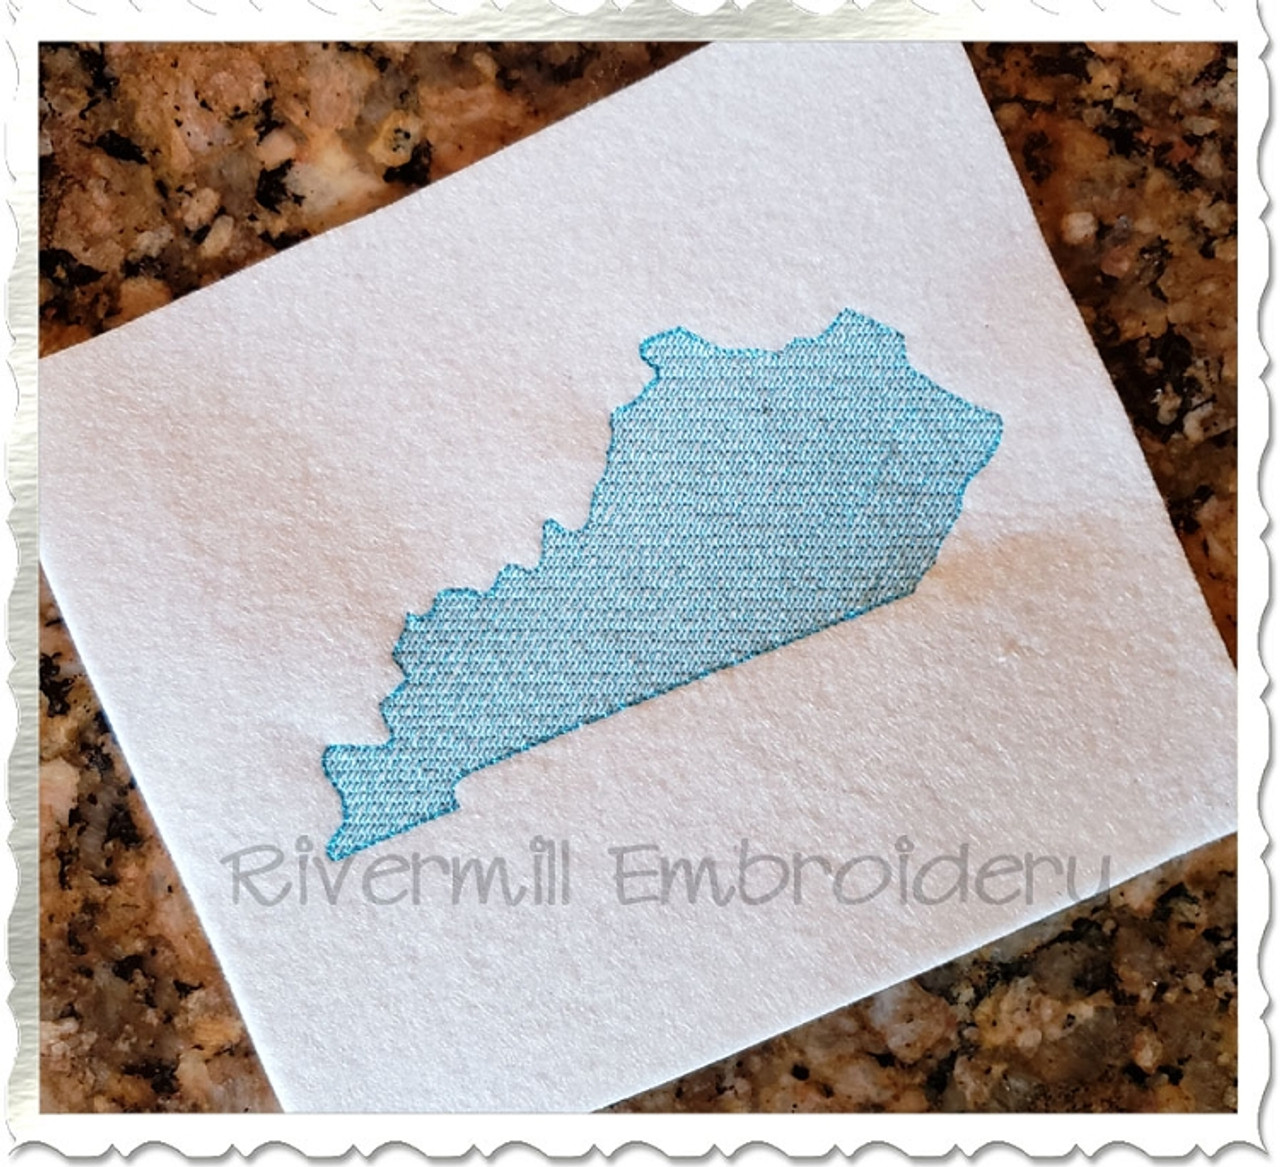 Vintage Sketch Style Kentucky Machine Embroidery Design - Rivermill ...